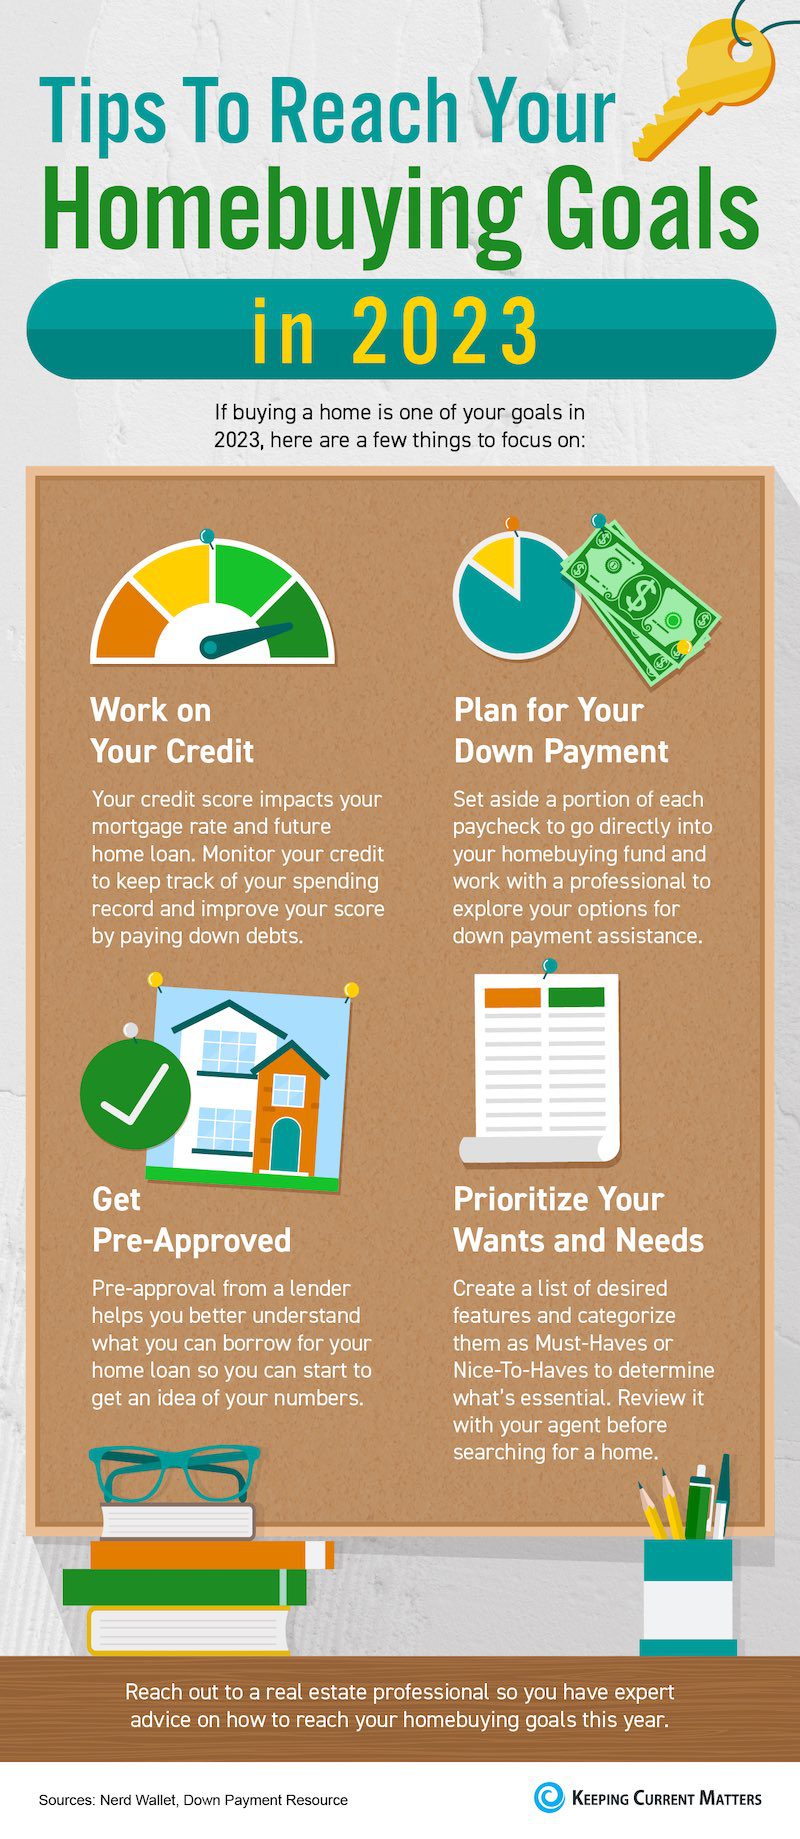 Tips To Reach Your Homebuying Goals in 2023 [INFOGRAPHIC] | Keeping Current Matters